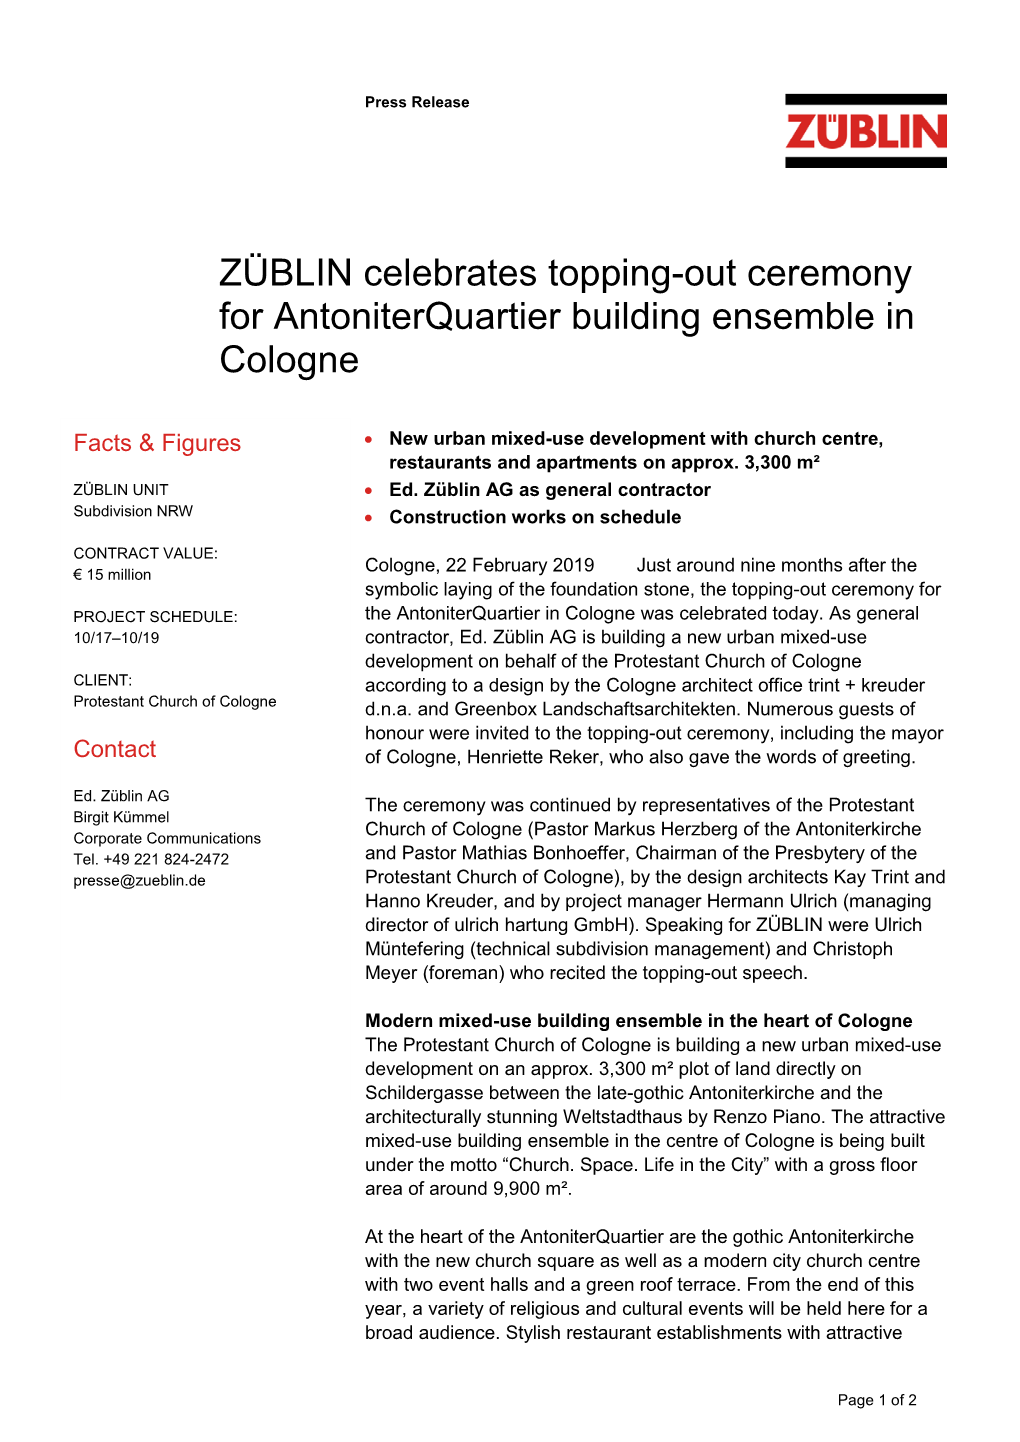 ZÜBLIN Celebrates Topping-Out Ceremony for Antoniterquartier Building Ensemble in Cologne